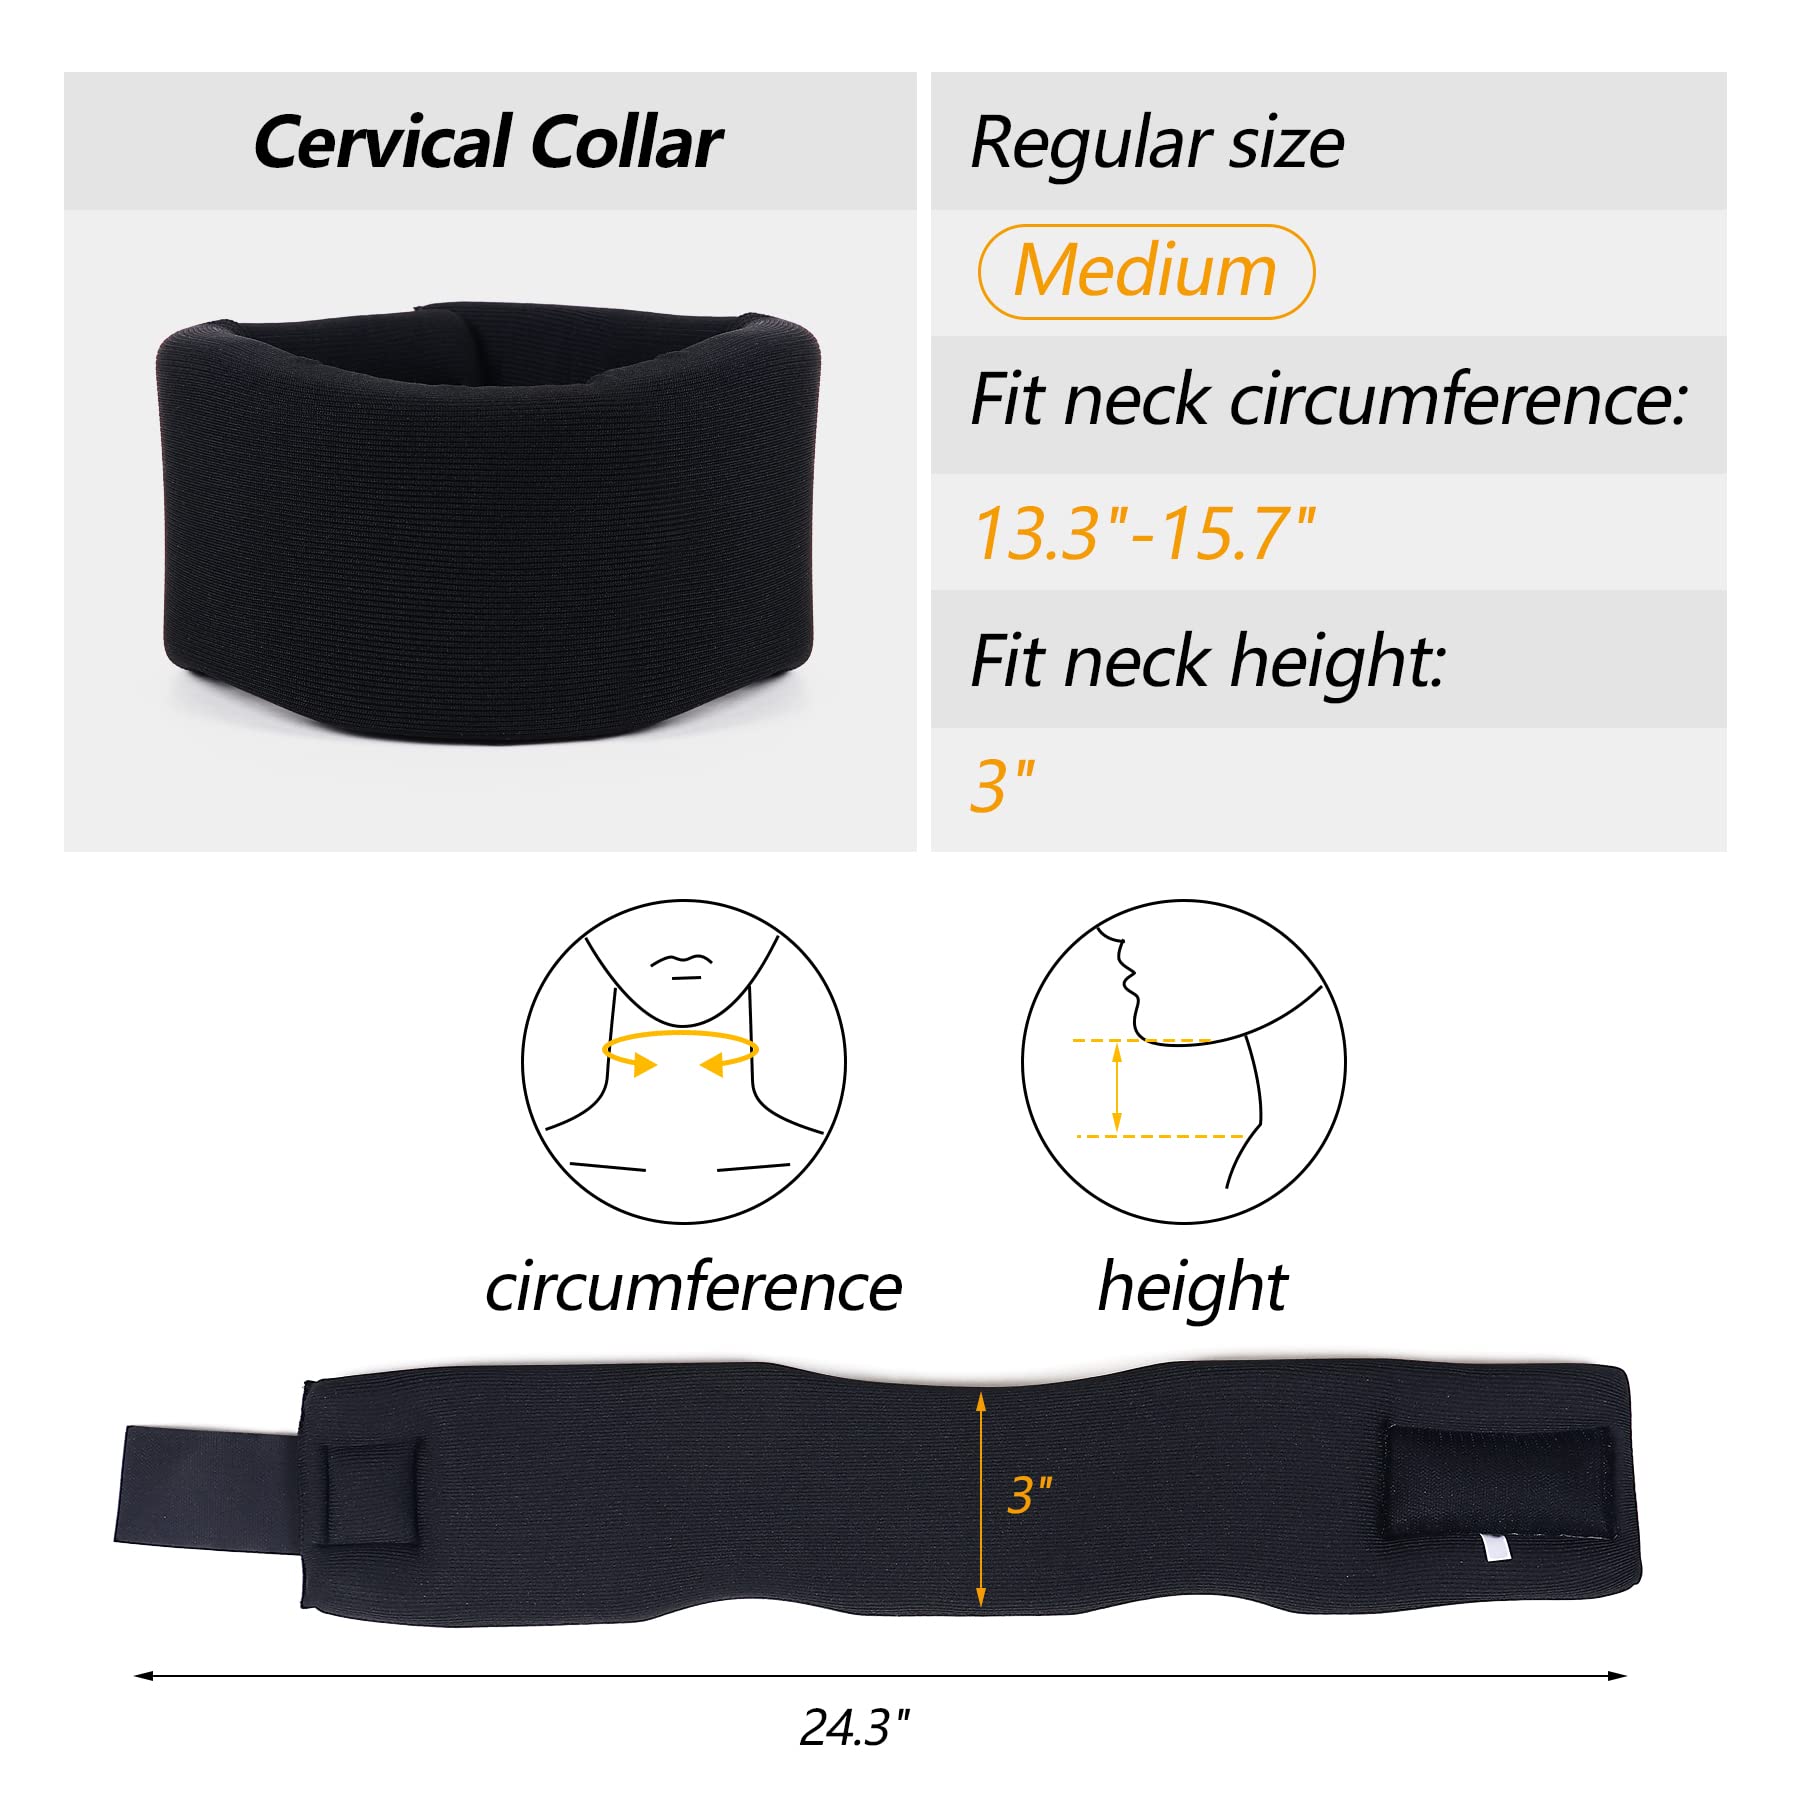 Soft Foam Neck Brace Universal Cervical Collar, Adjustable Support Brace for Sleeping - Relieves Pain and Spine Pressure, Neck Collar After Whiplash or Injury (3